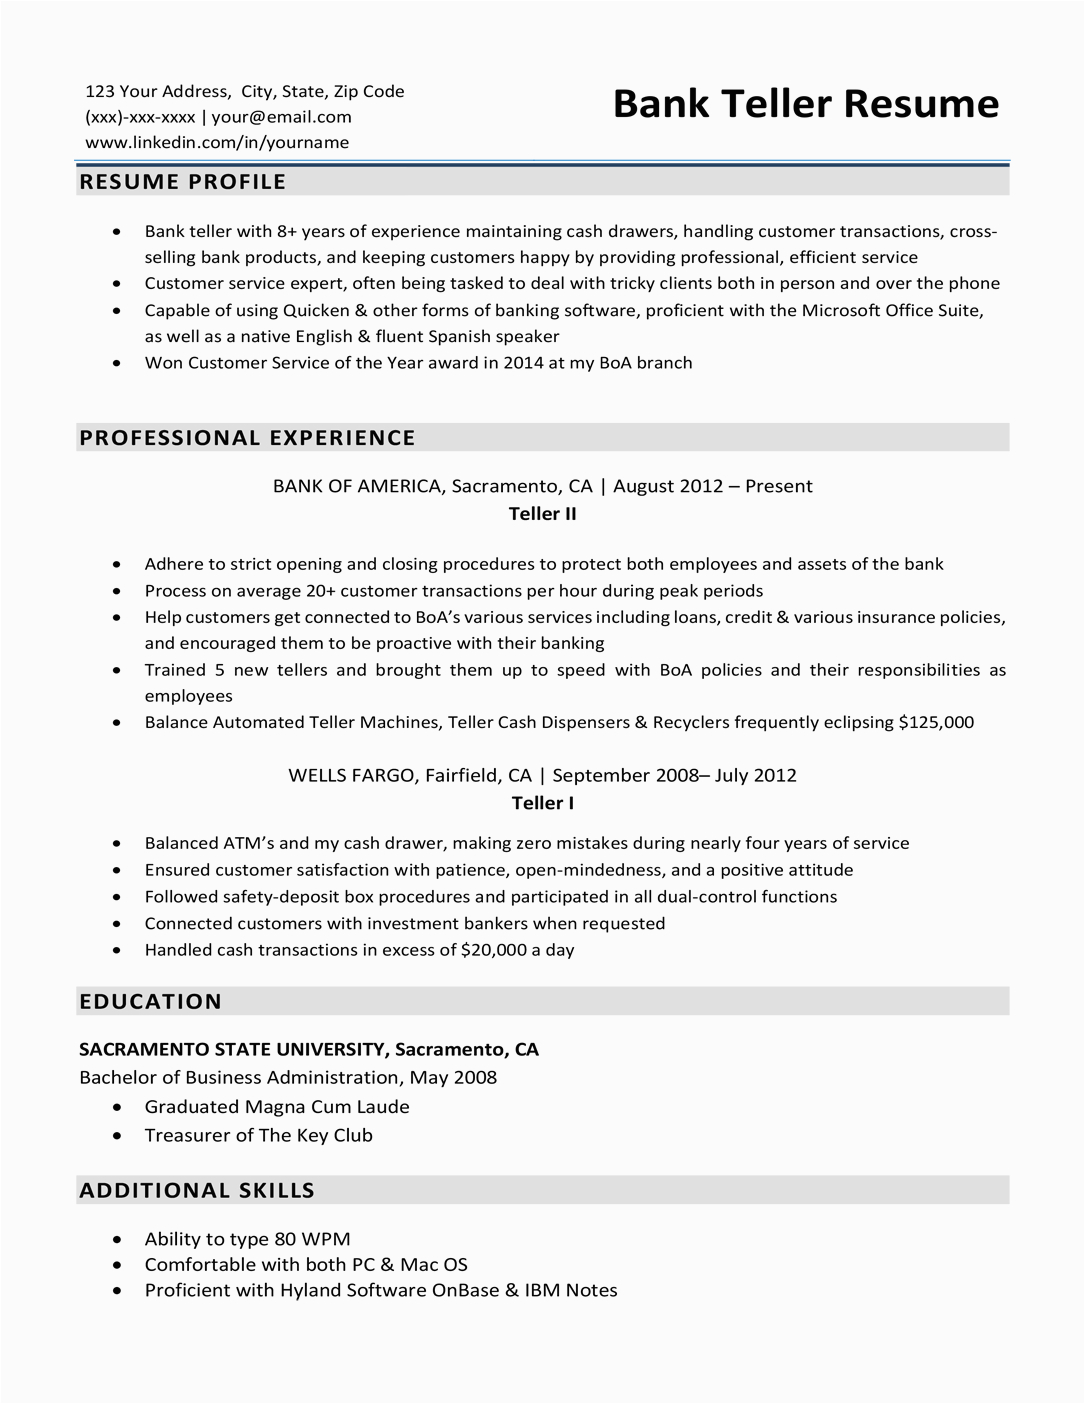 Sample Resume for Bank Teller with Experience Bank Teller Resume Sample Finder Jobs